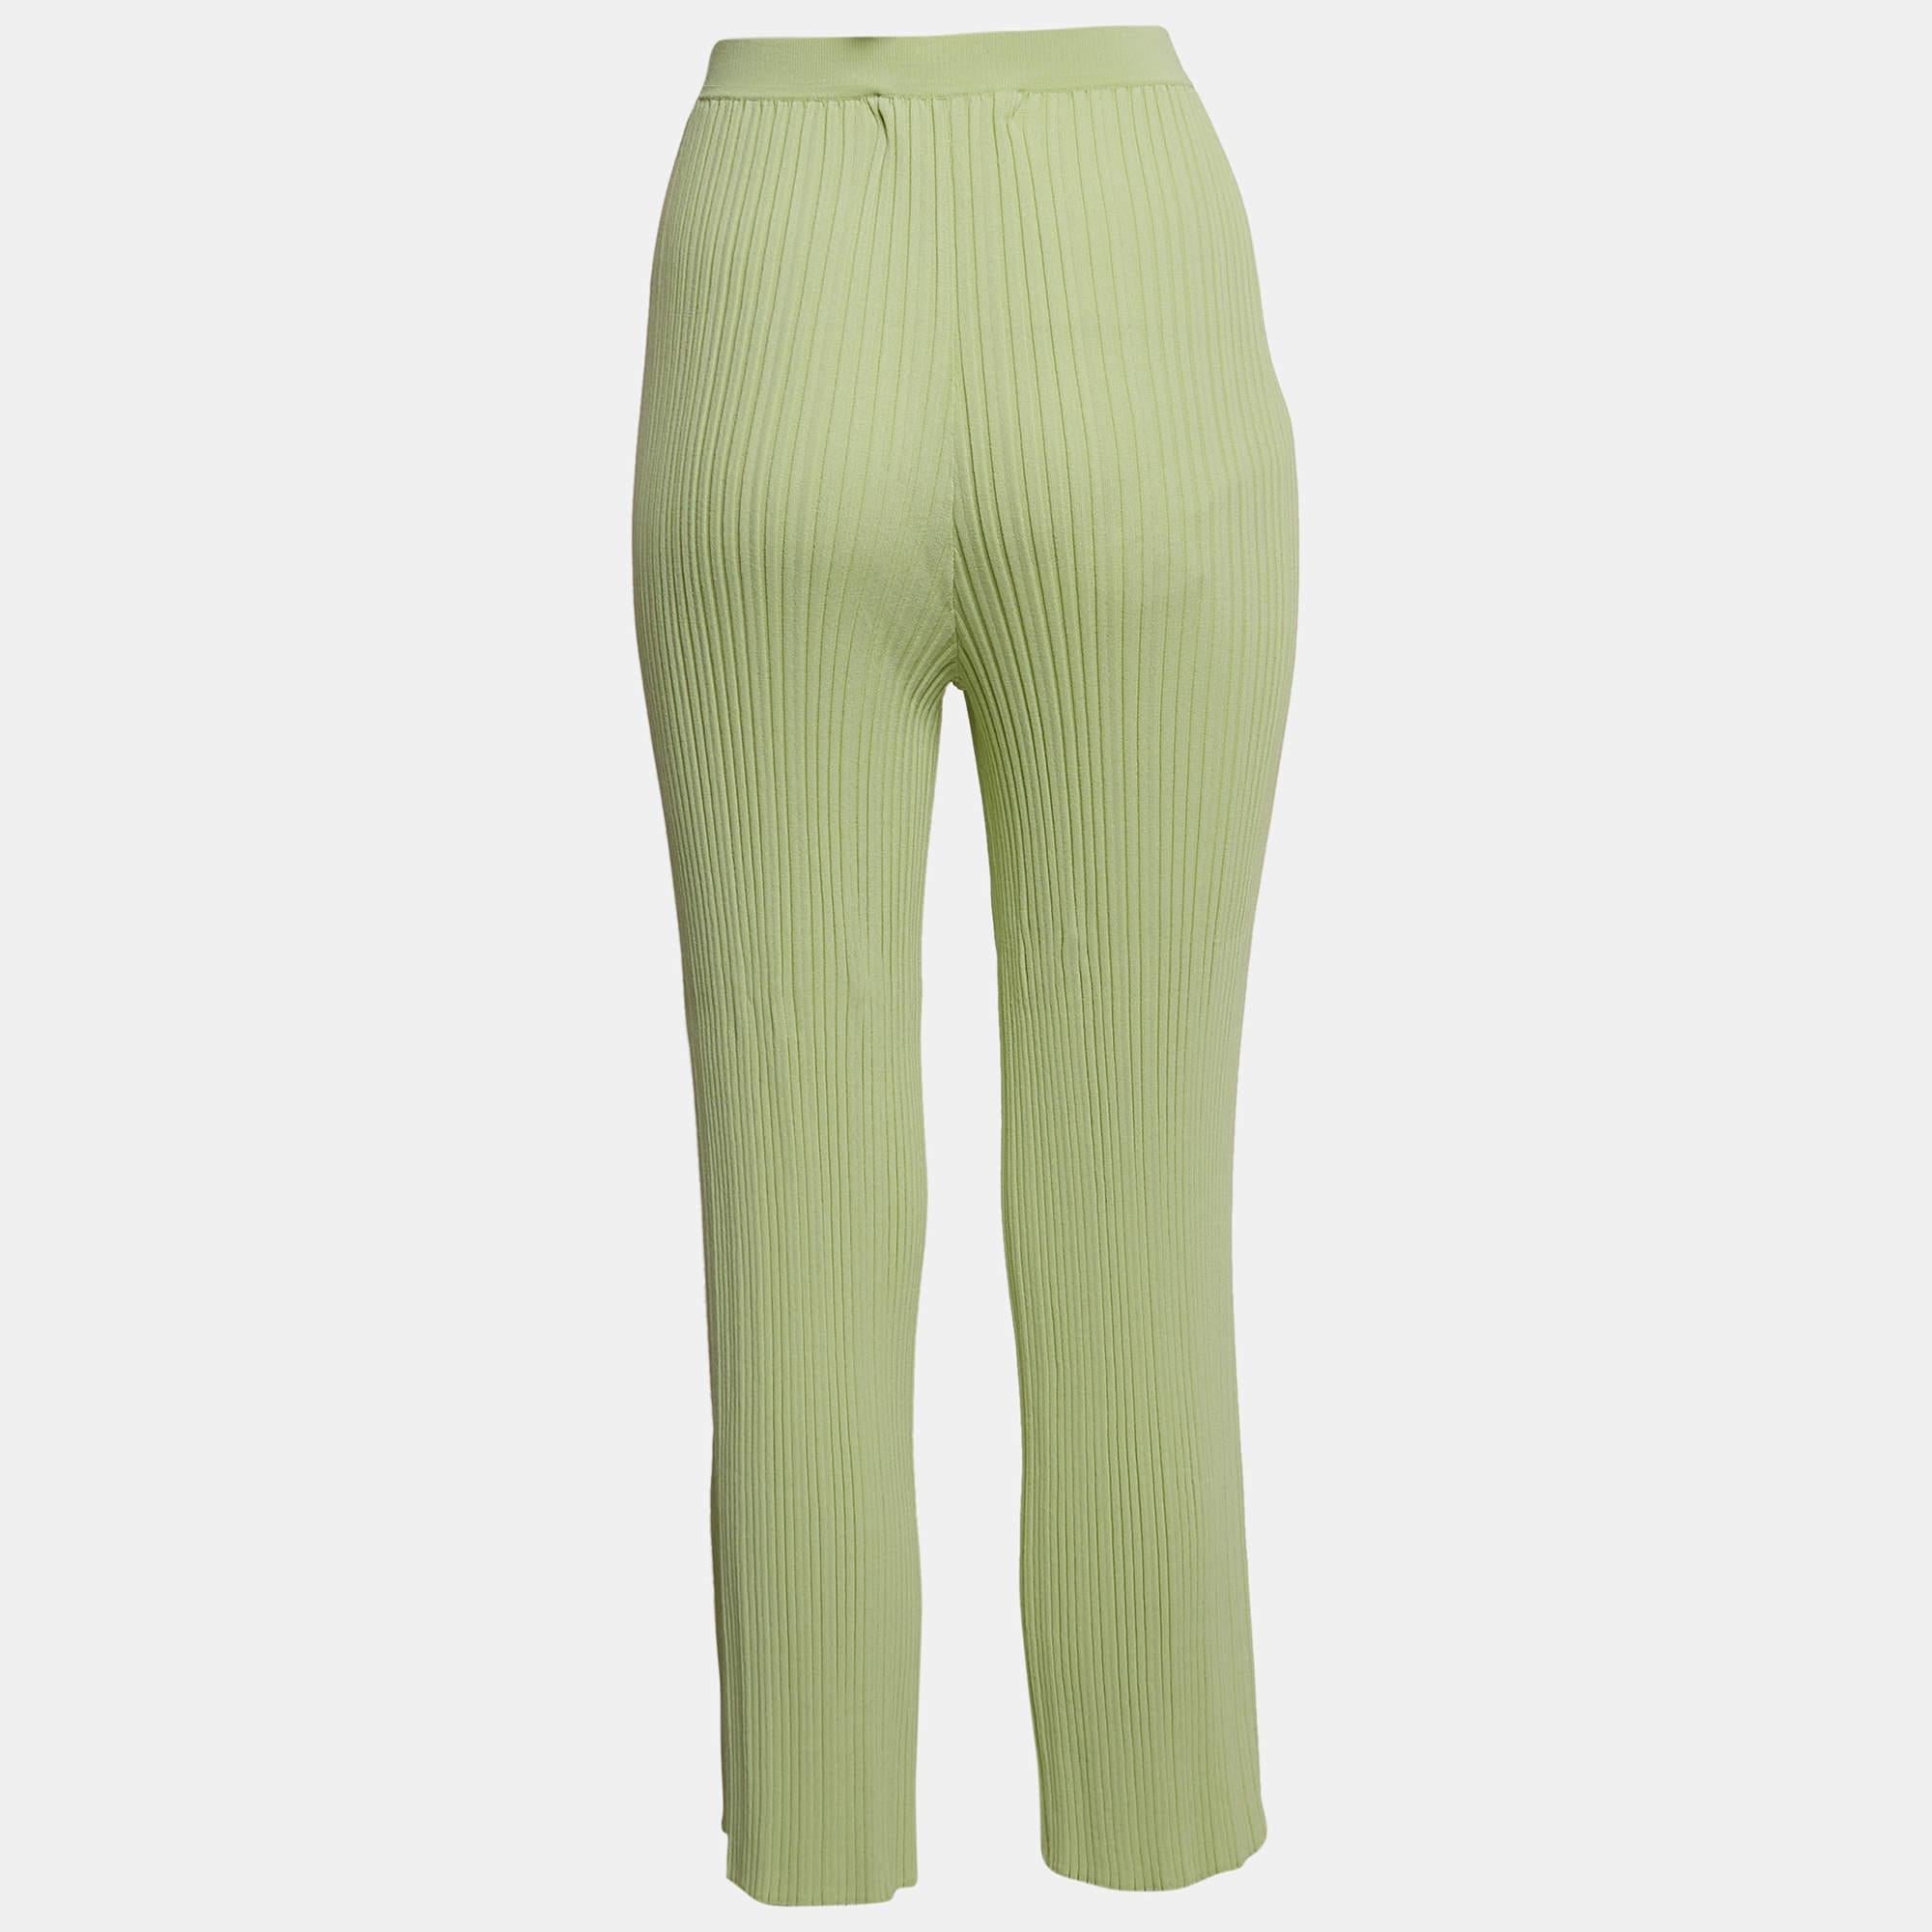 Dion Lee's pants showcase modern elegance. The ribbed texture adds depth, while the mint green hue exudes sophistication. Tailored for comfort and style, these pants seamlessly blend versatility with a luxurious feel, making them a fashion statement